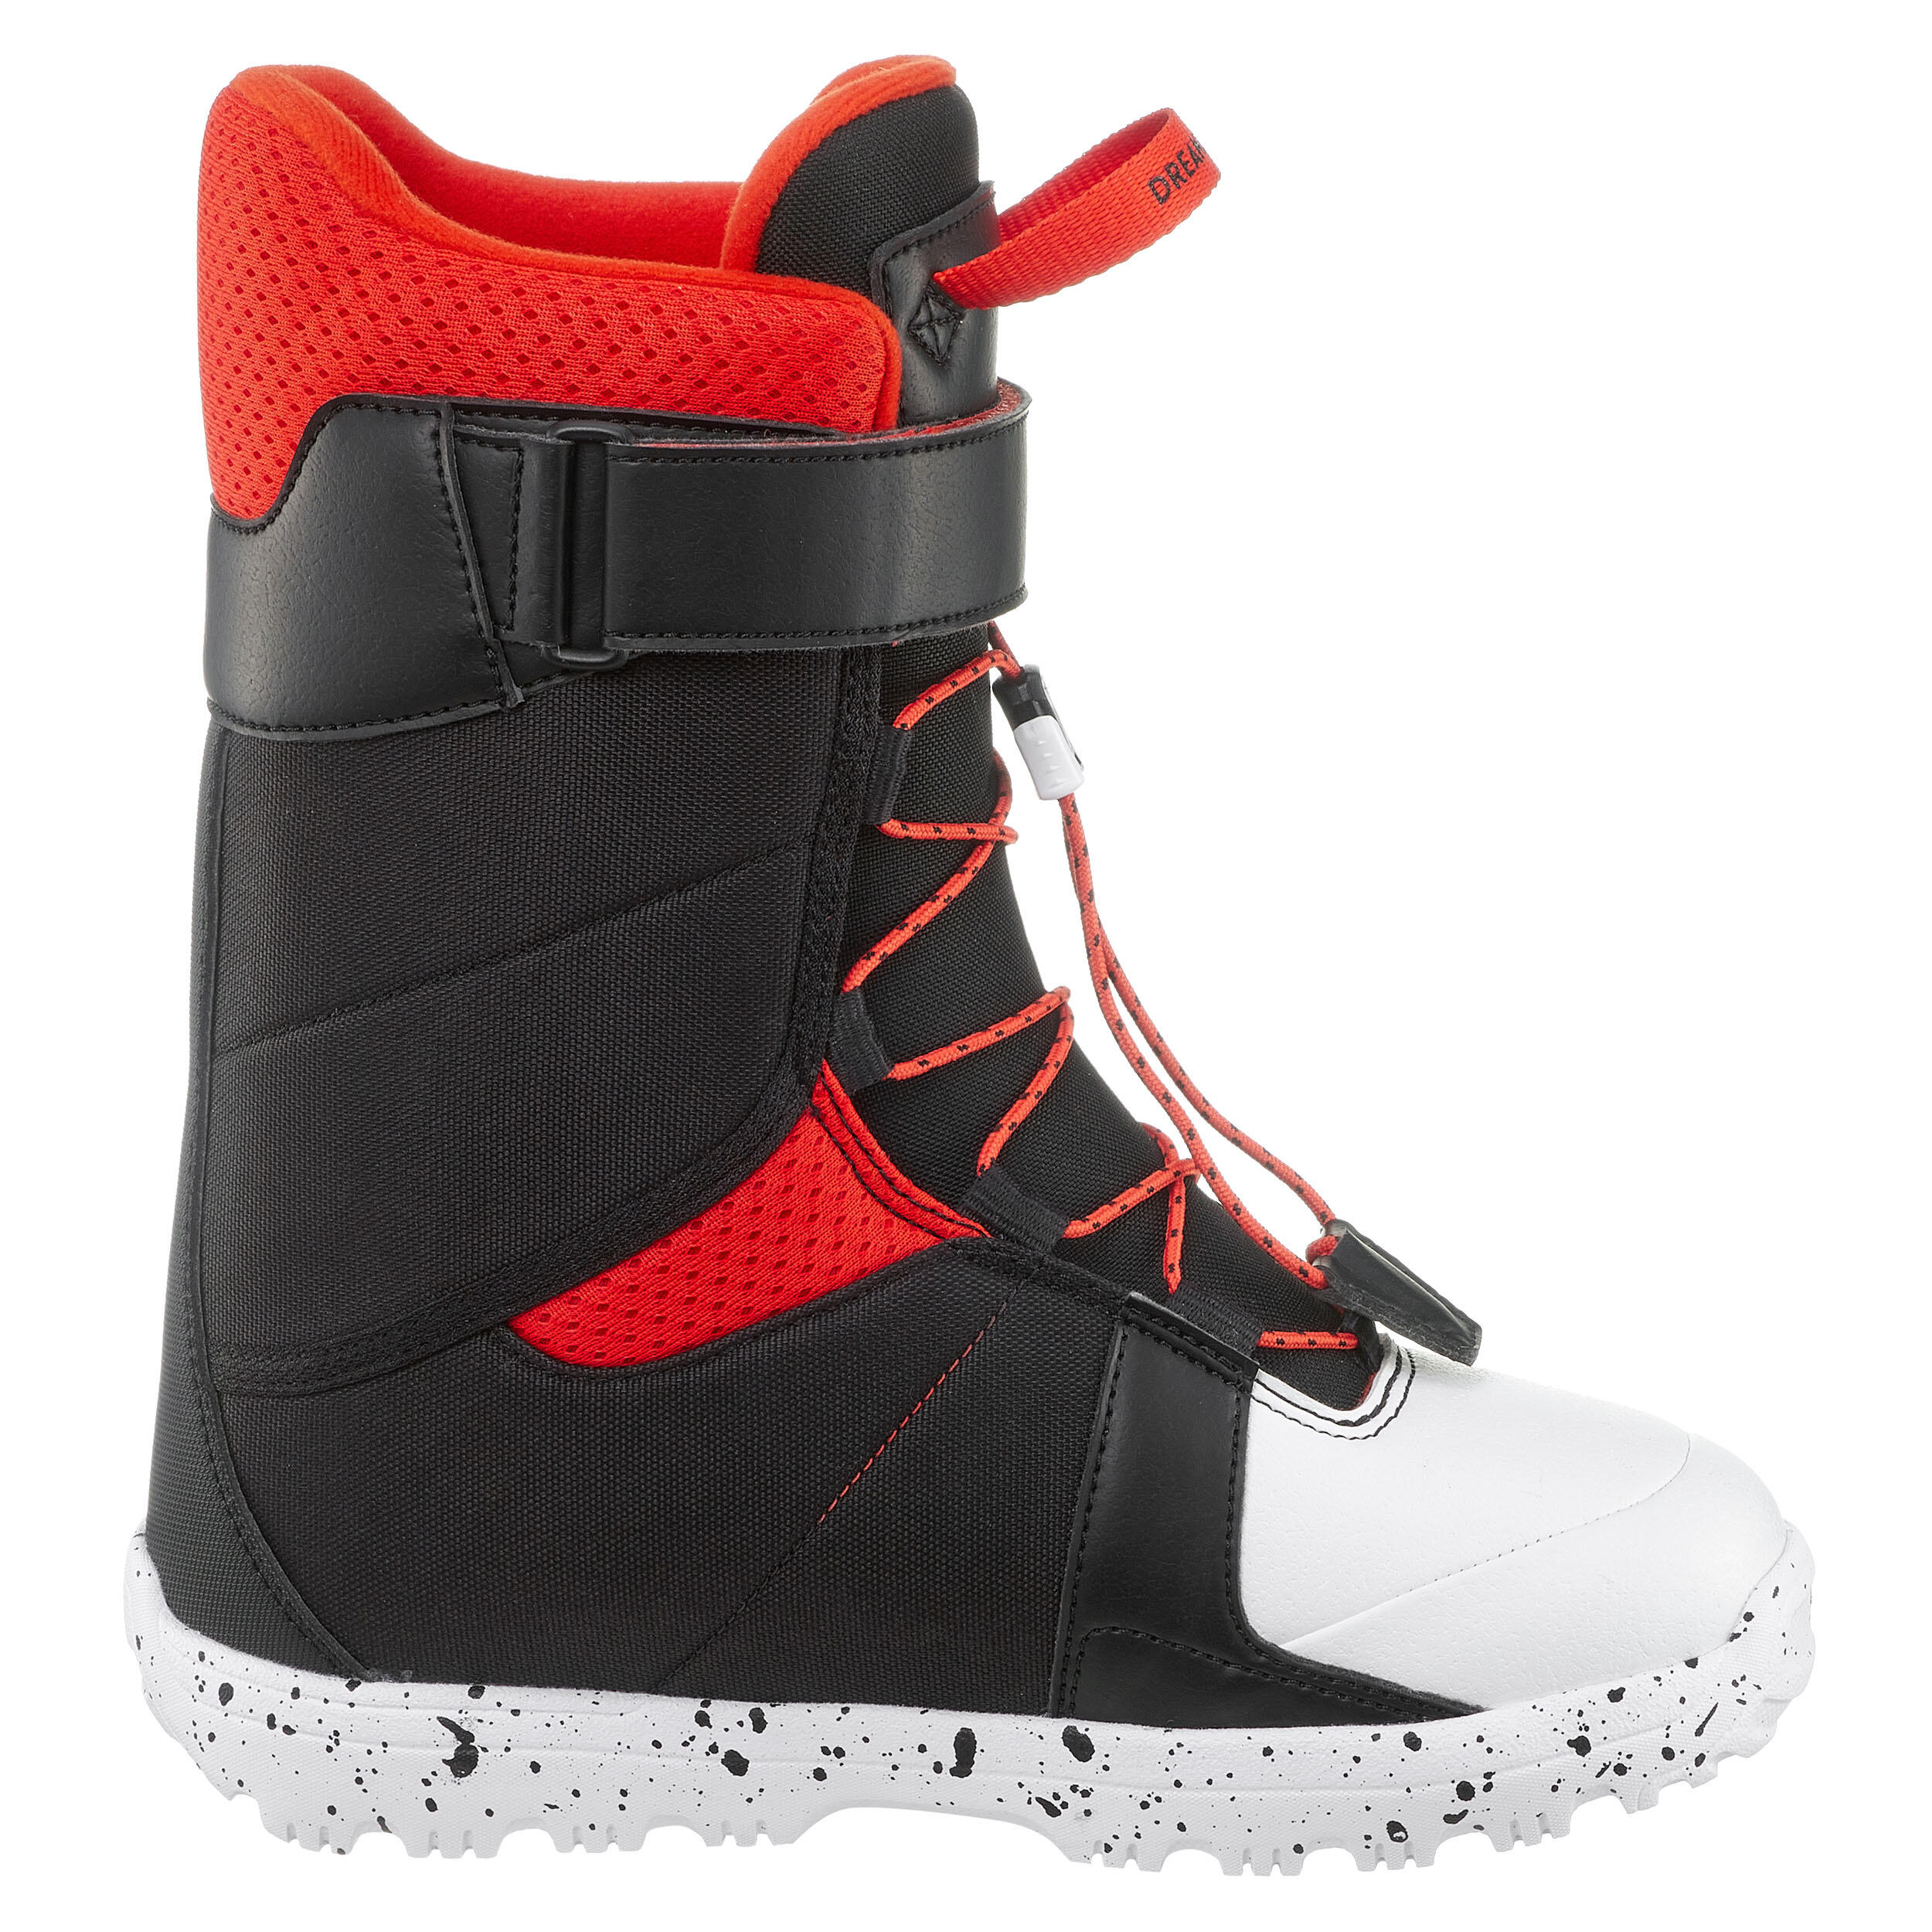 Kids’ Quick Fastening Snowboard Boots - Indy 100 - S 3/9